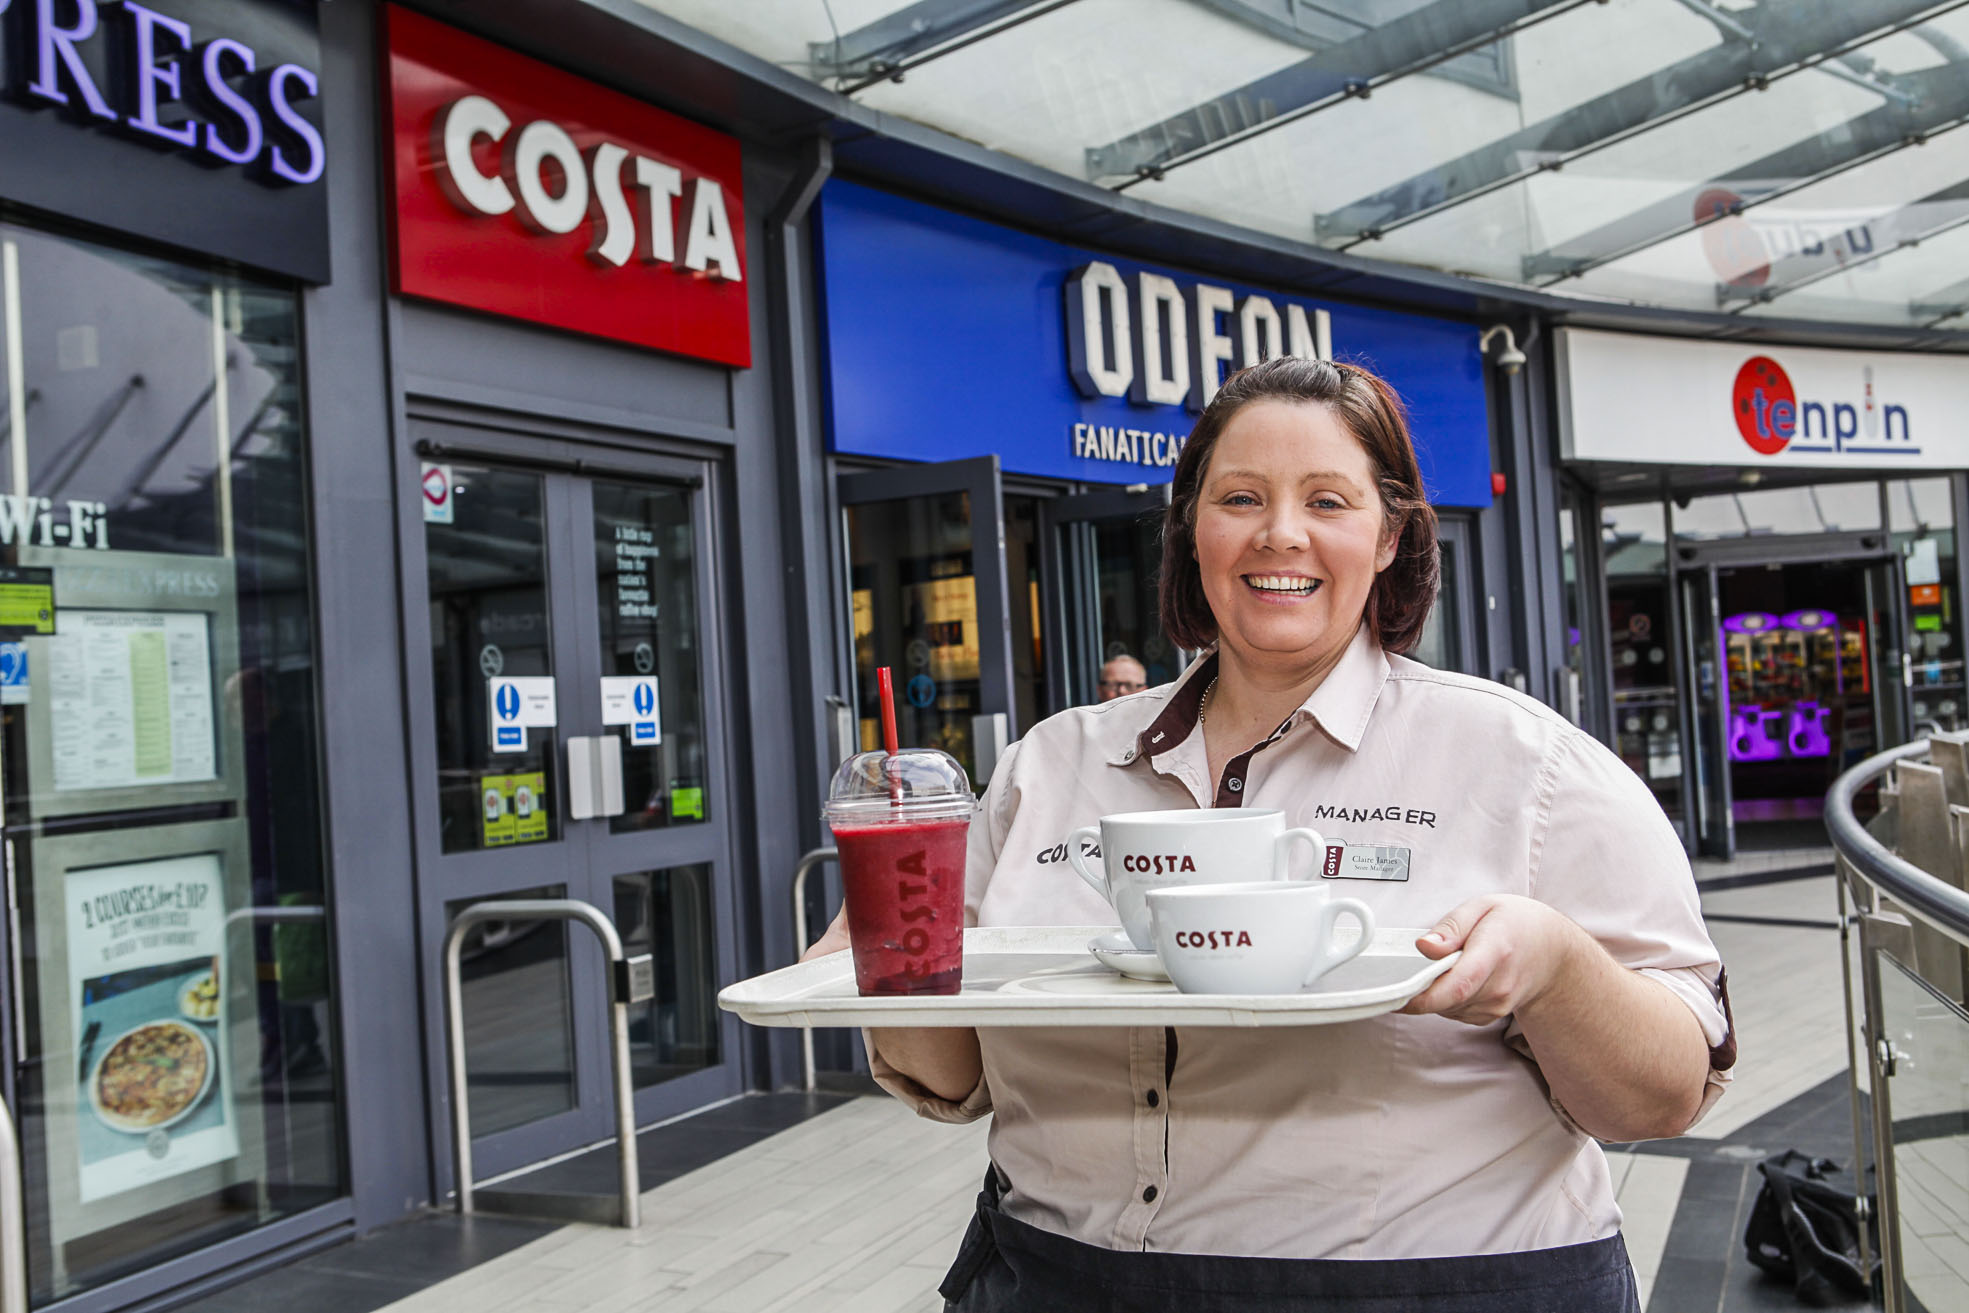 Barista Claire is full of beans after getting top job